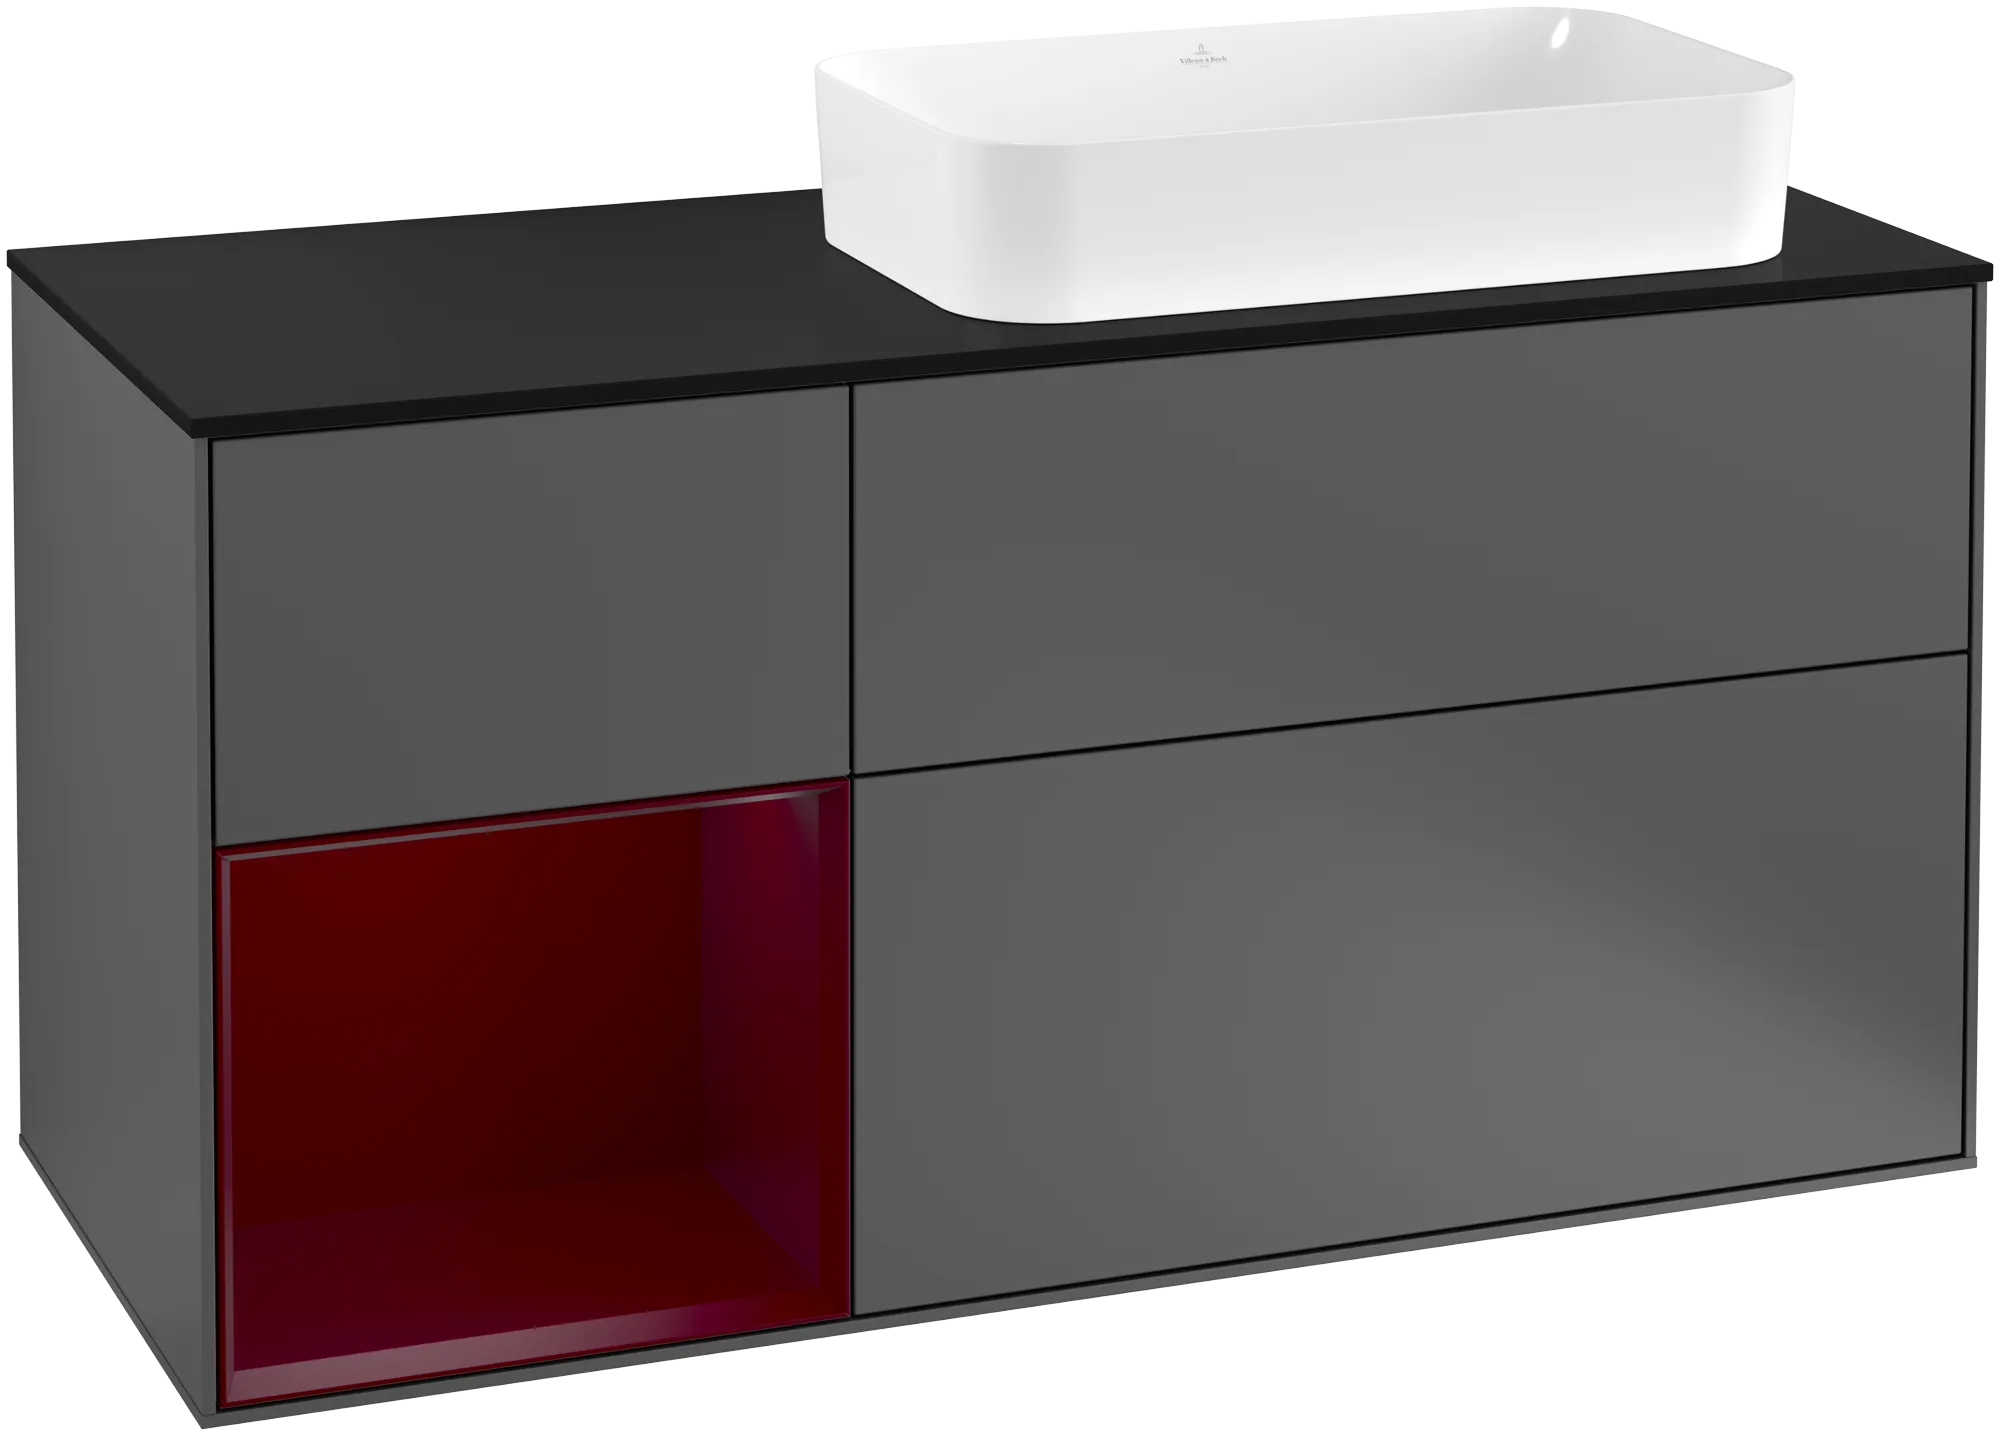 Picture of VILLEROY BOCH Finion Vanity unit, with lighting, 3 pull-out compartments, 1200 x 603 x 501 mm, Anthracite Matt Lacquer / Peony Matt Lacquer / Glass Black Matt #G272HBGK